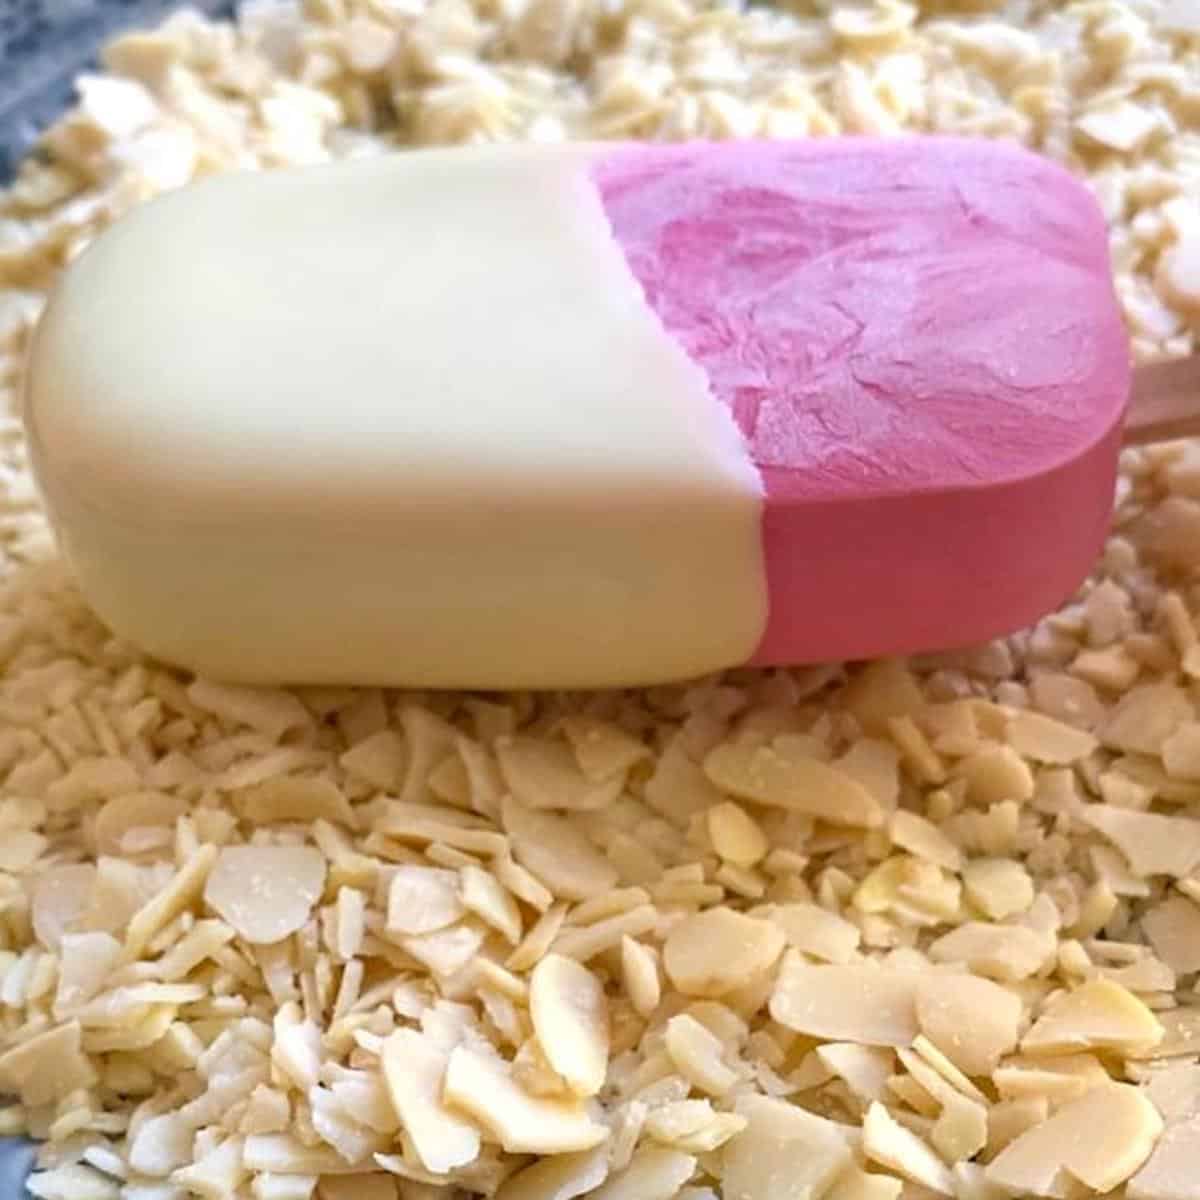 A raspberry ice cream bar coated in white chocolate being dipped into crushed flaked almonds on a plate.